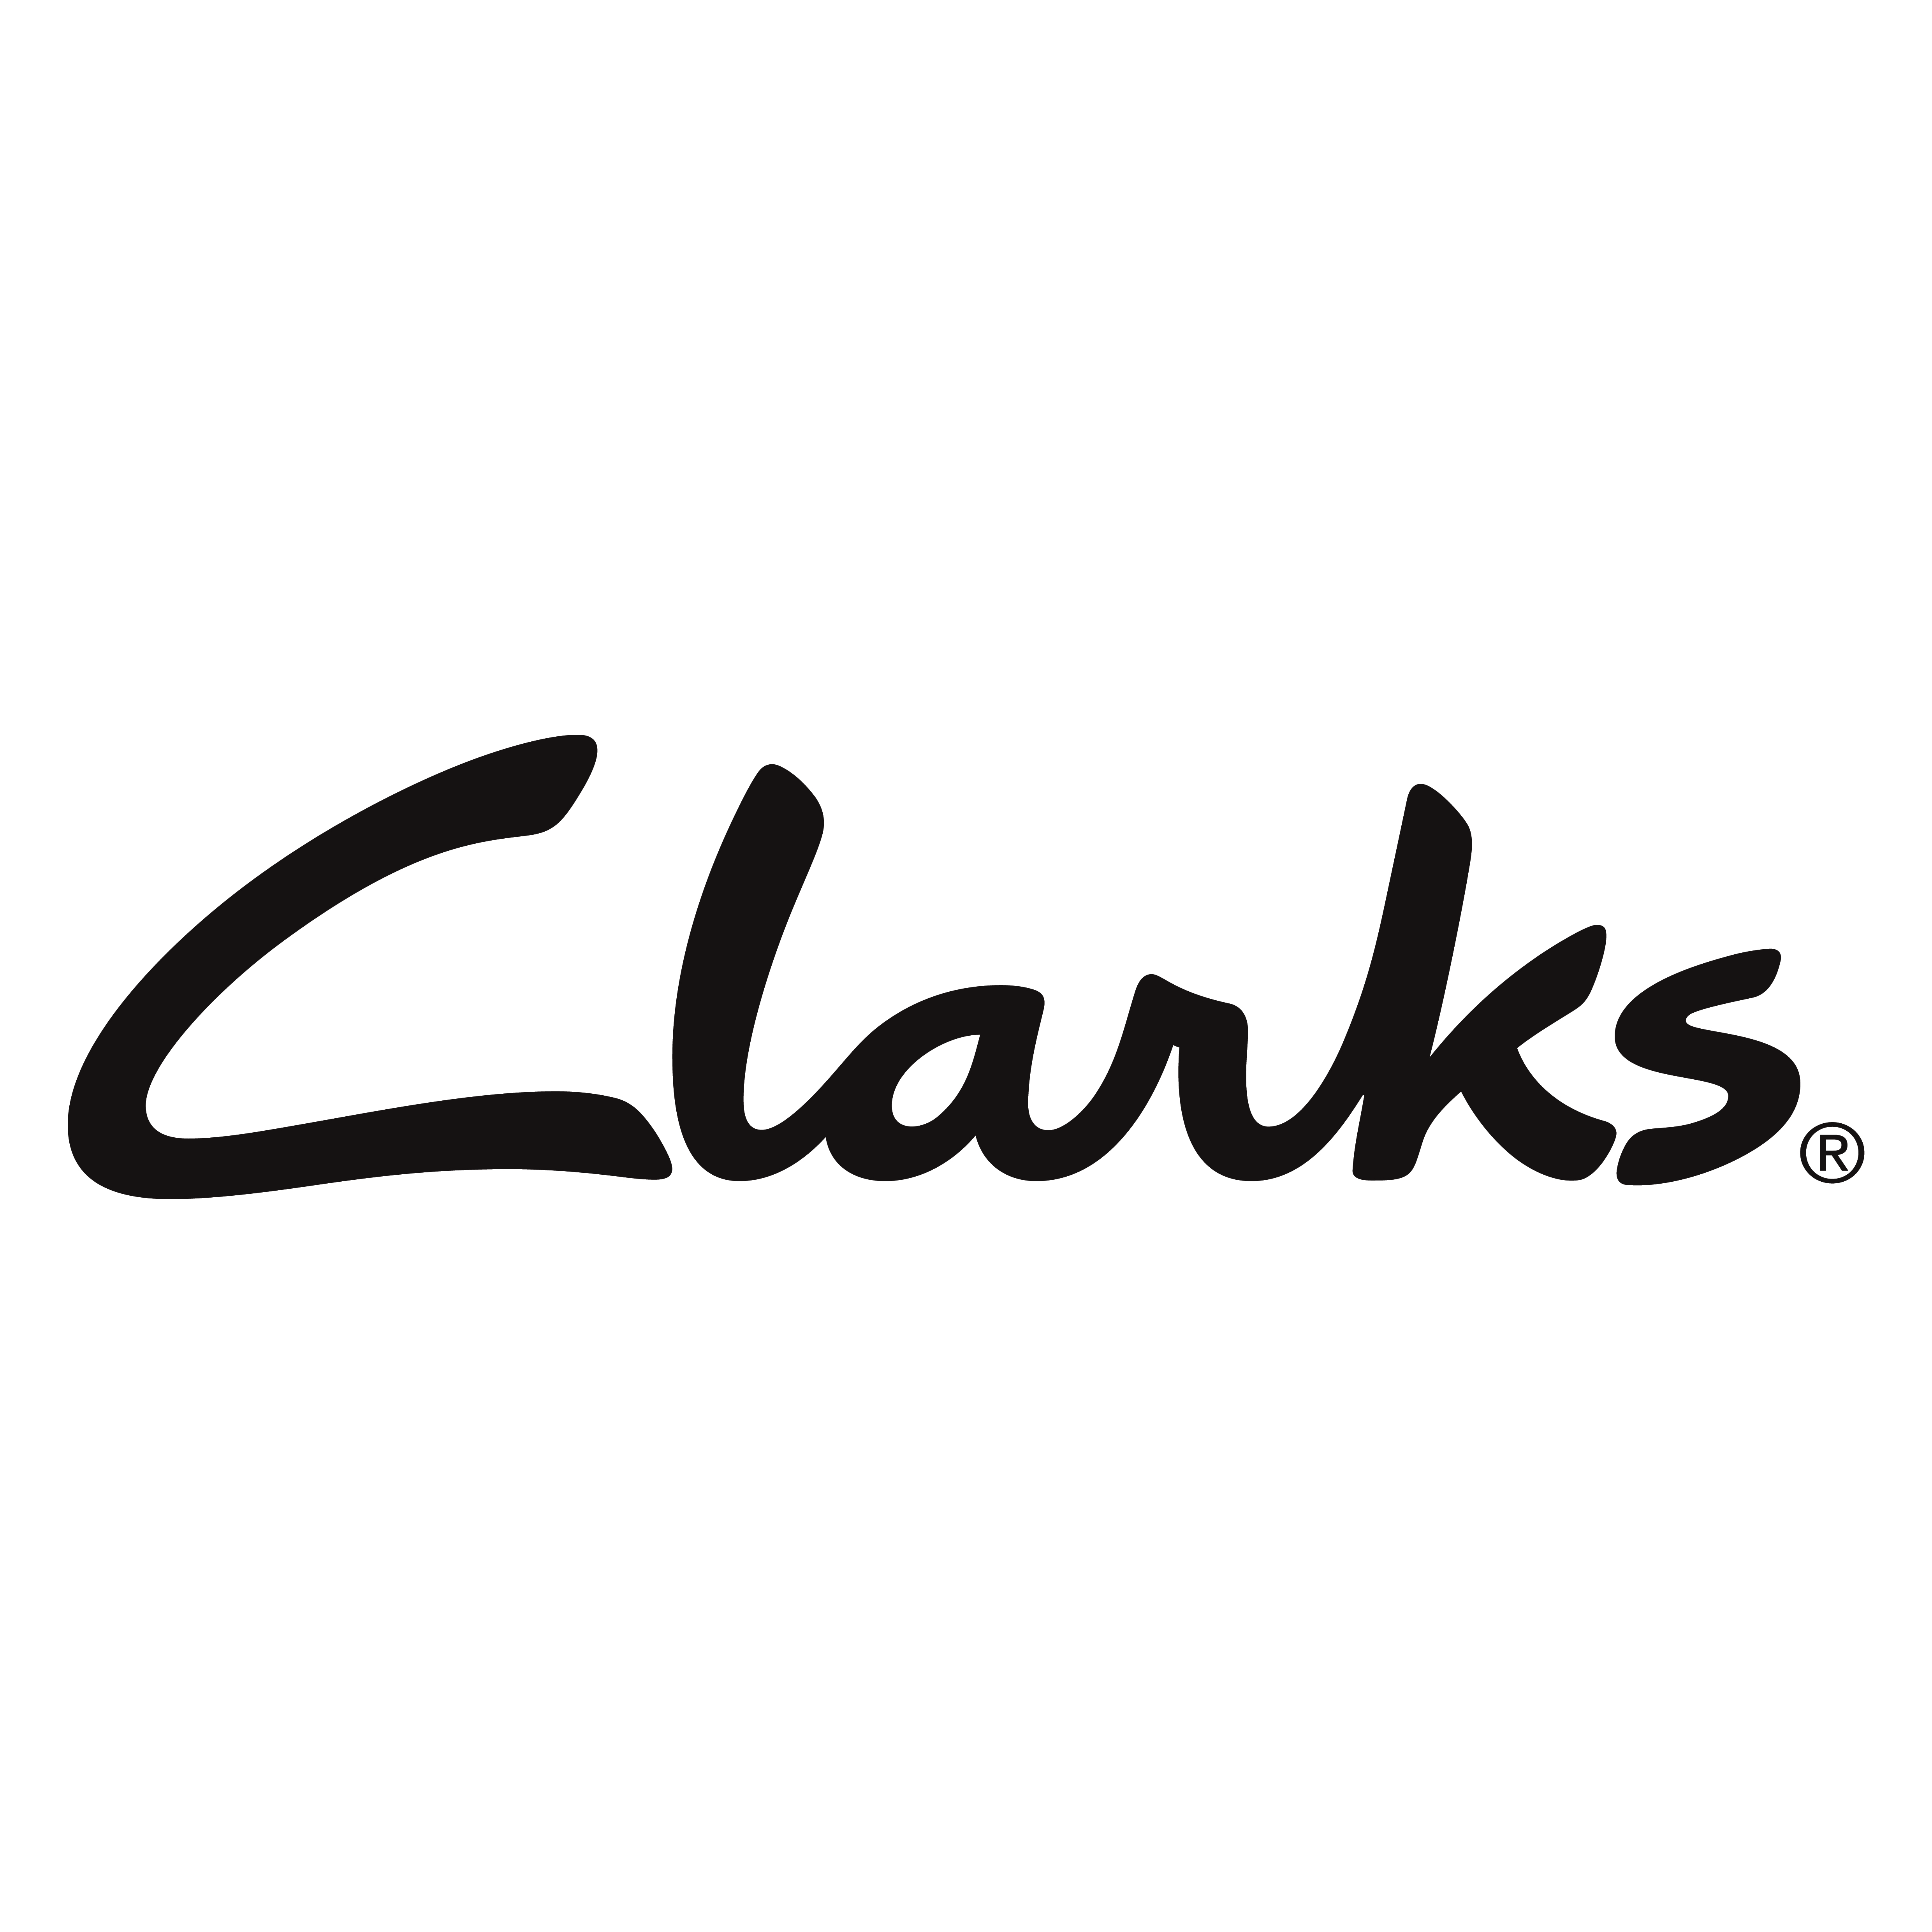 clarks outlet store near me